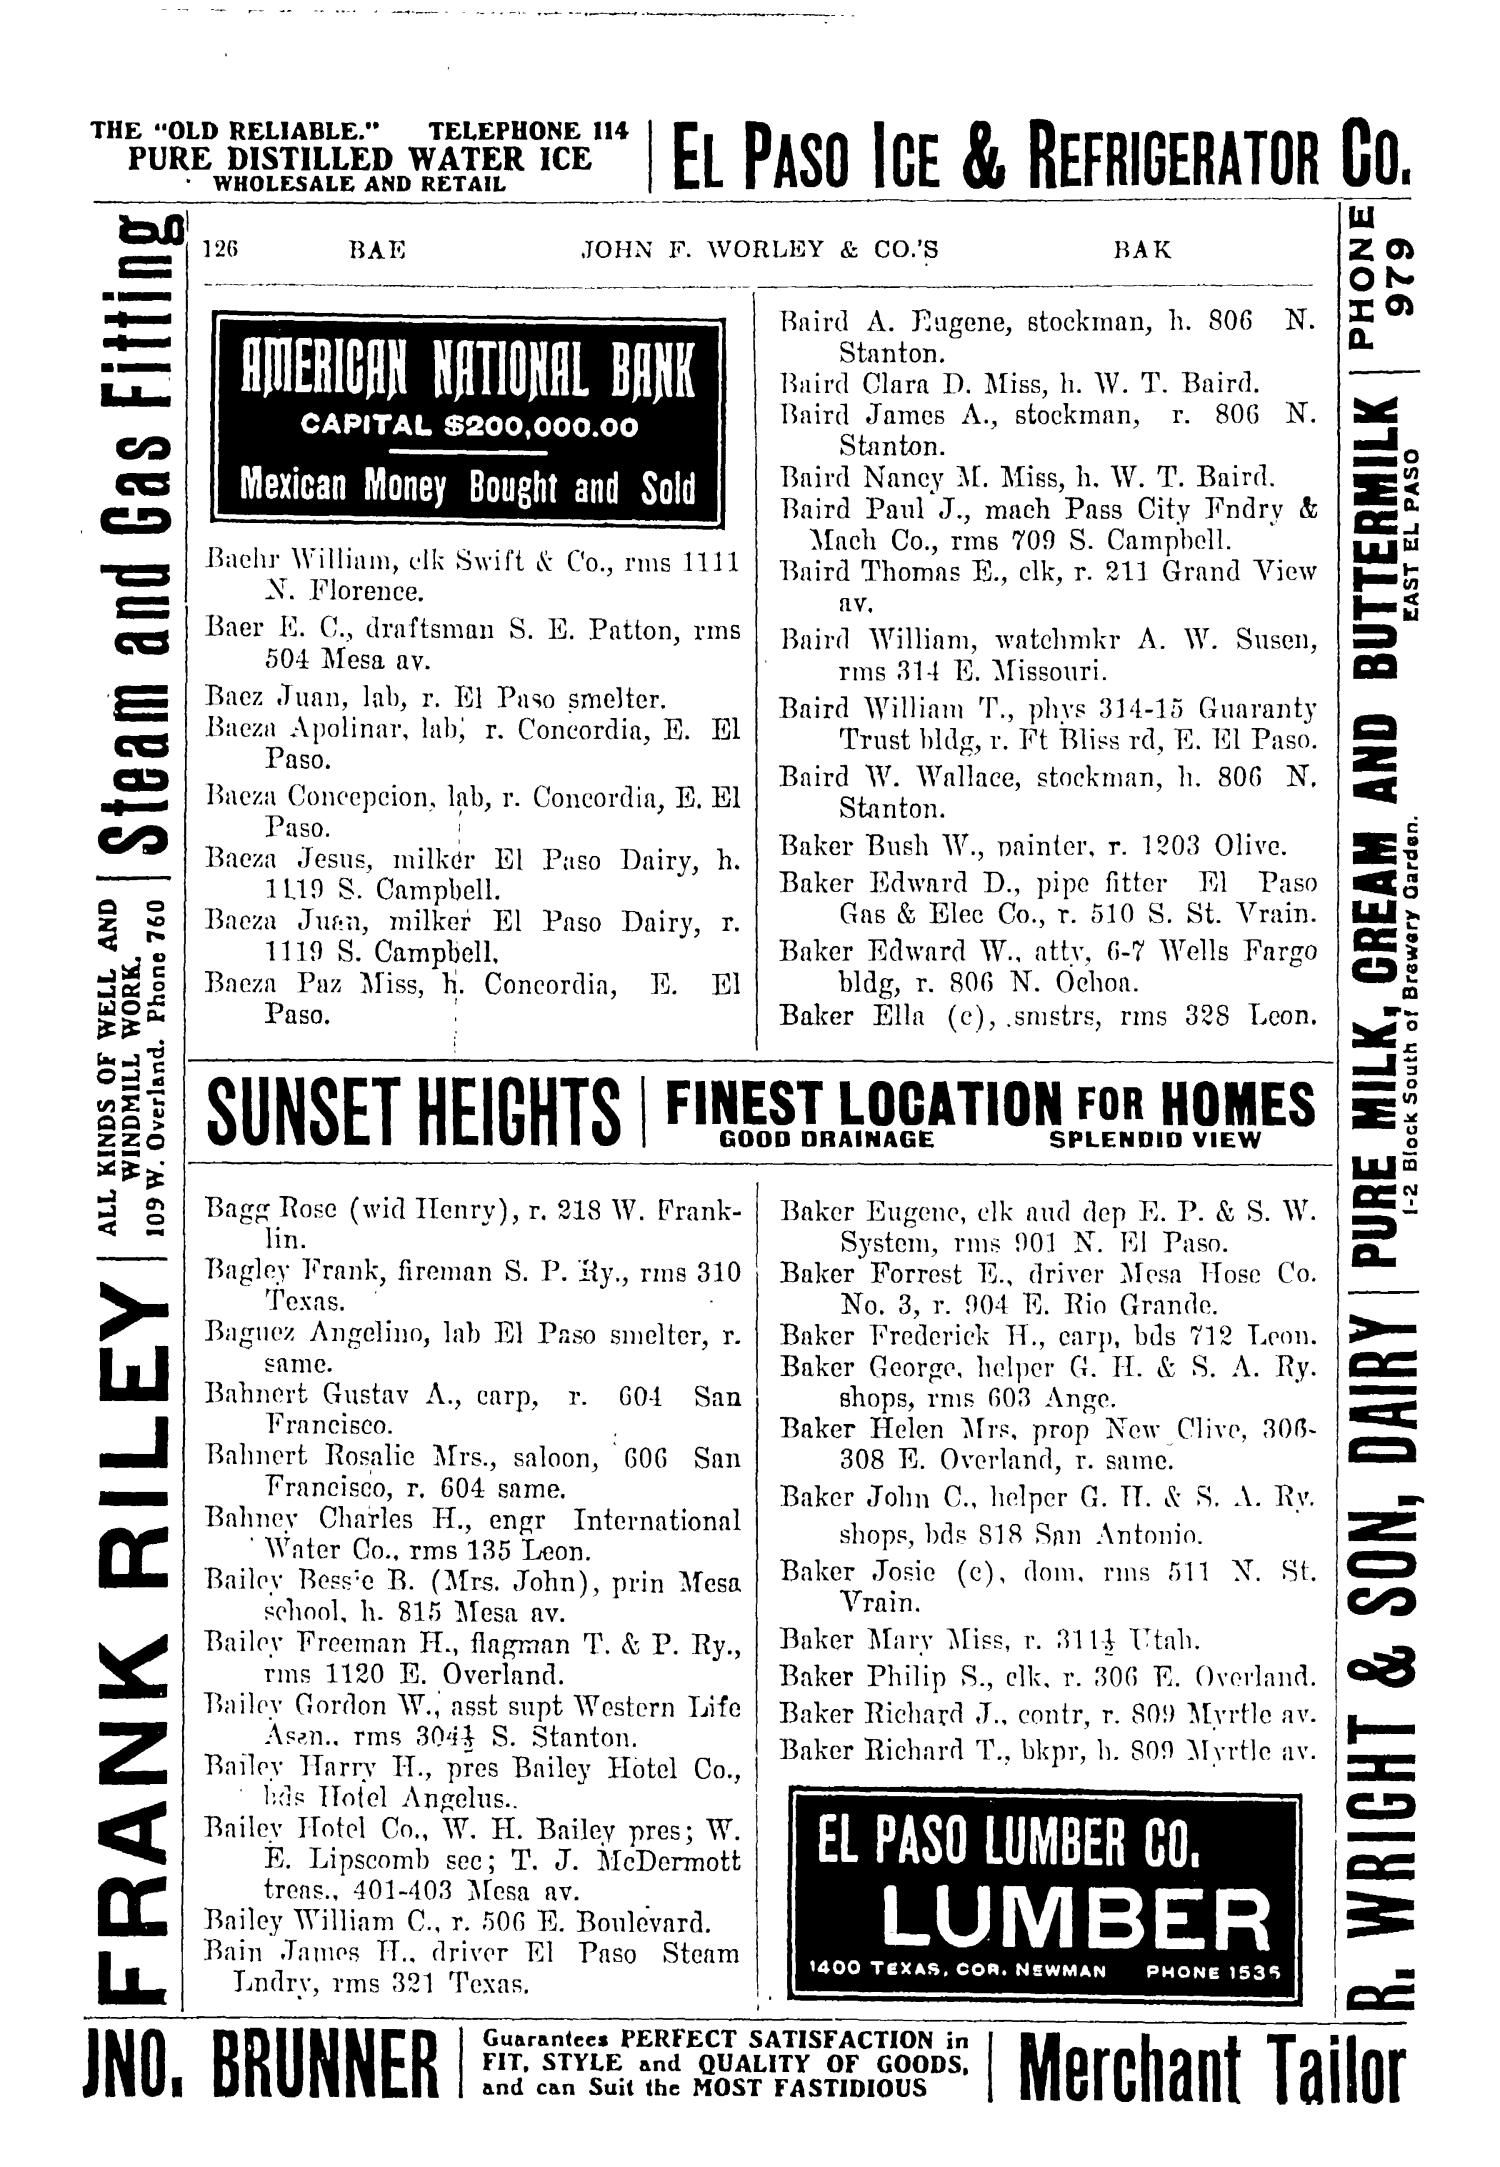 John F. Worley & Co.'s El Paso Directory for 1906
                                                
                                                    126
                                                